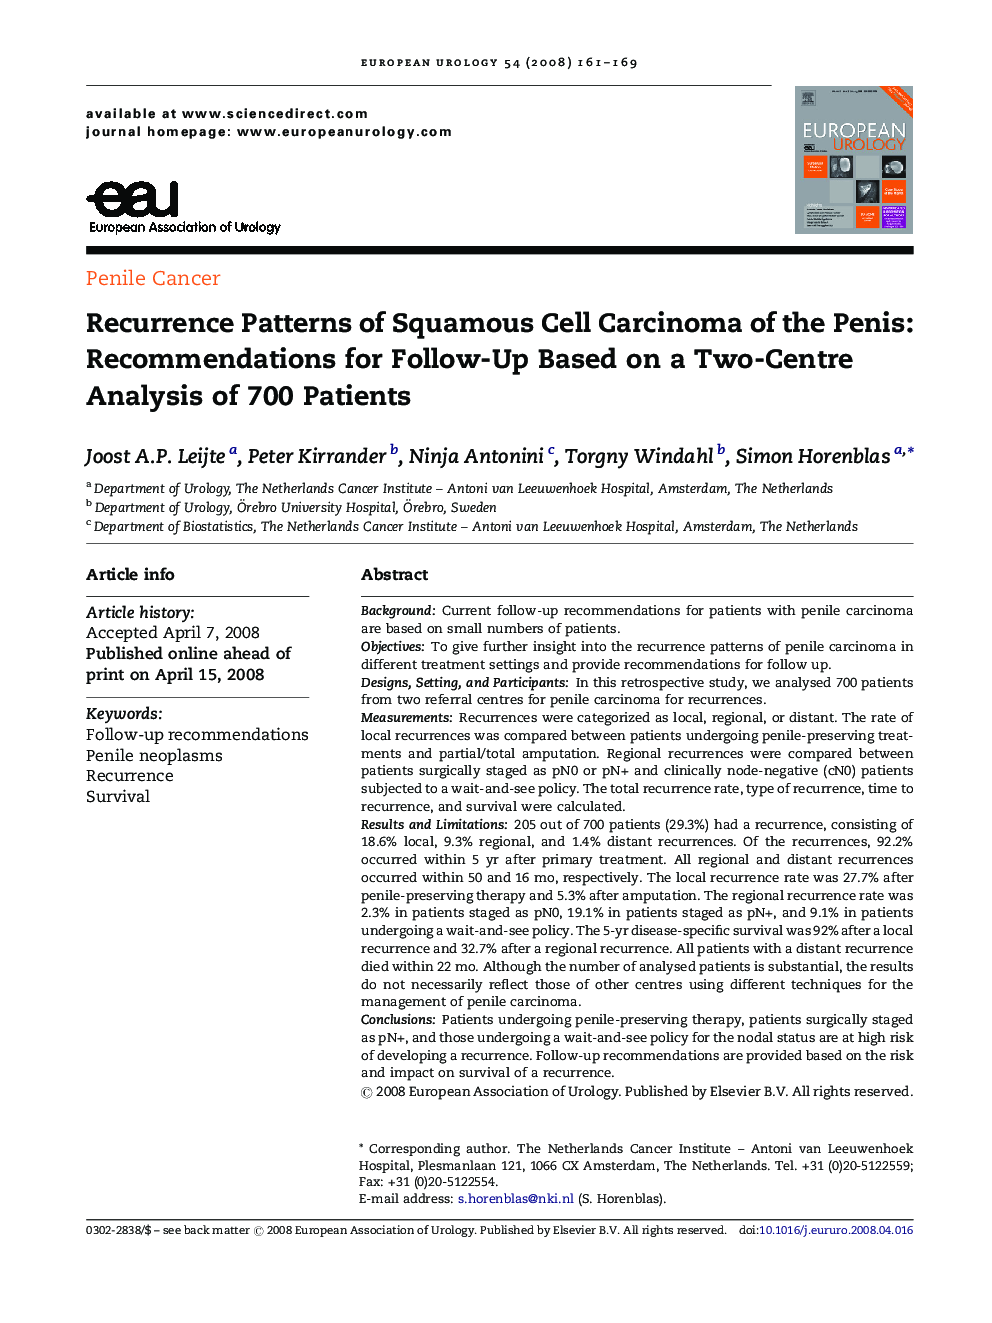 Recurrence Patterns of Squamous Cell Carcinoma of the Penis: Recommendations for Follow-Up Based on a Two-Centre Analysis of 700 Patients